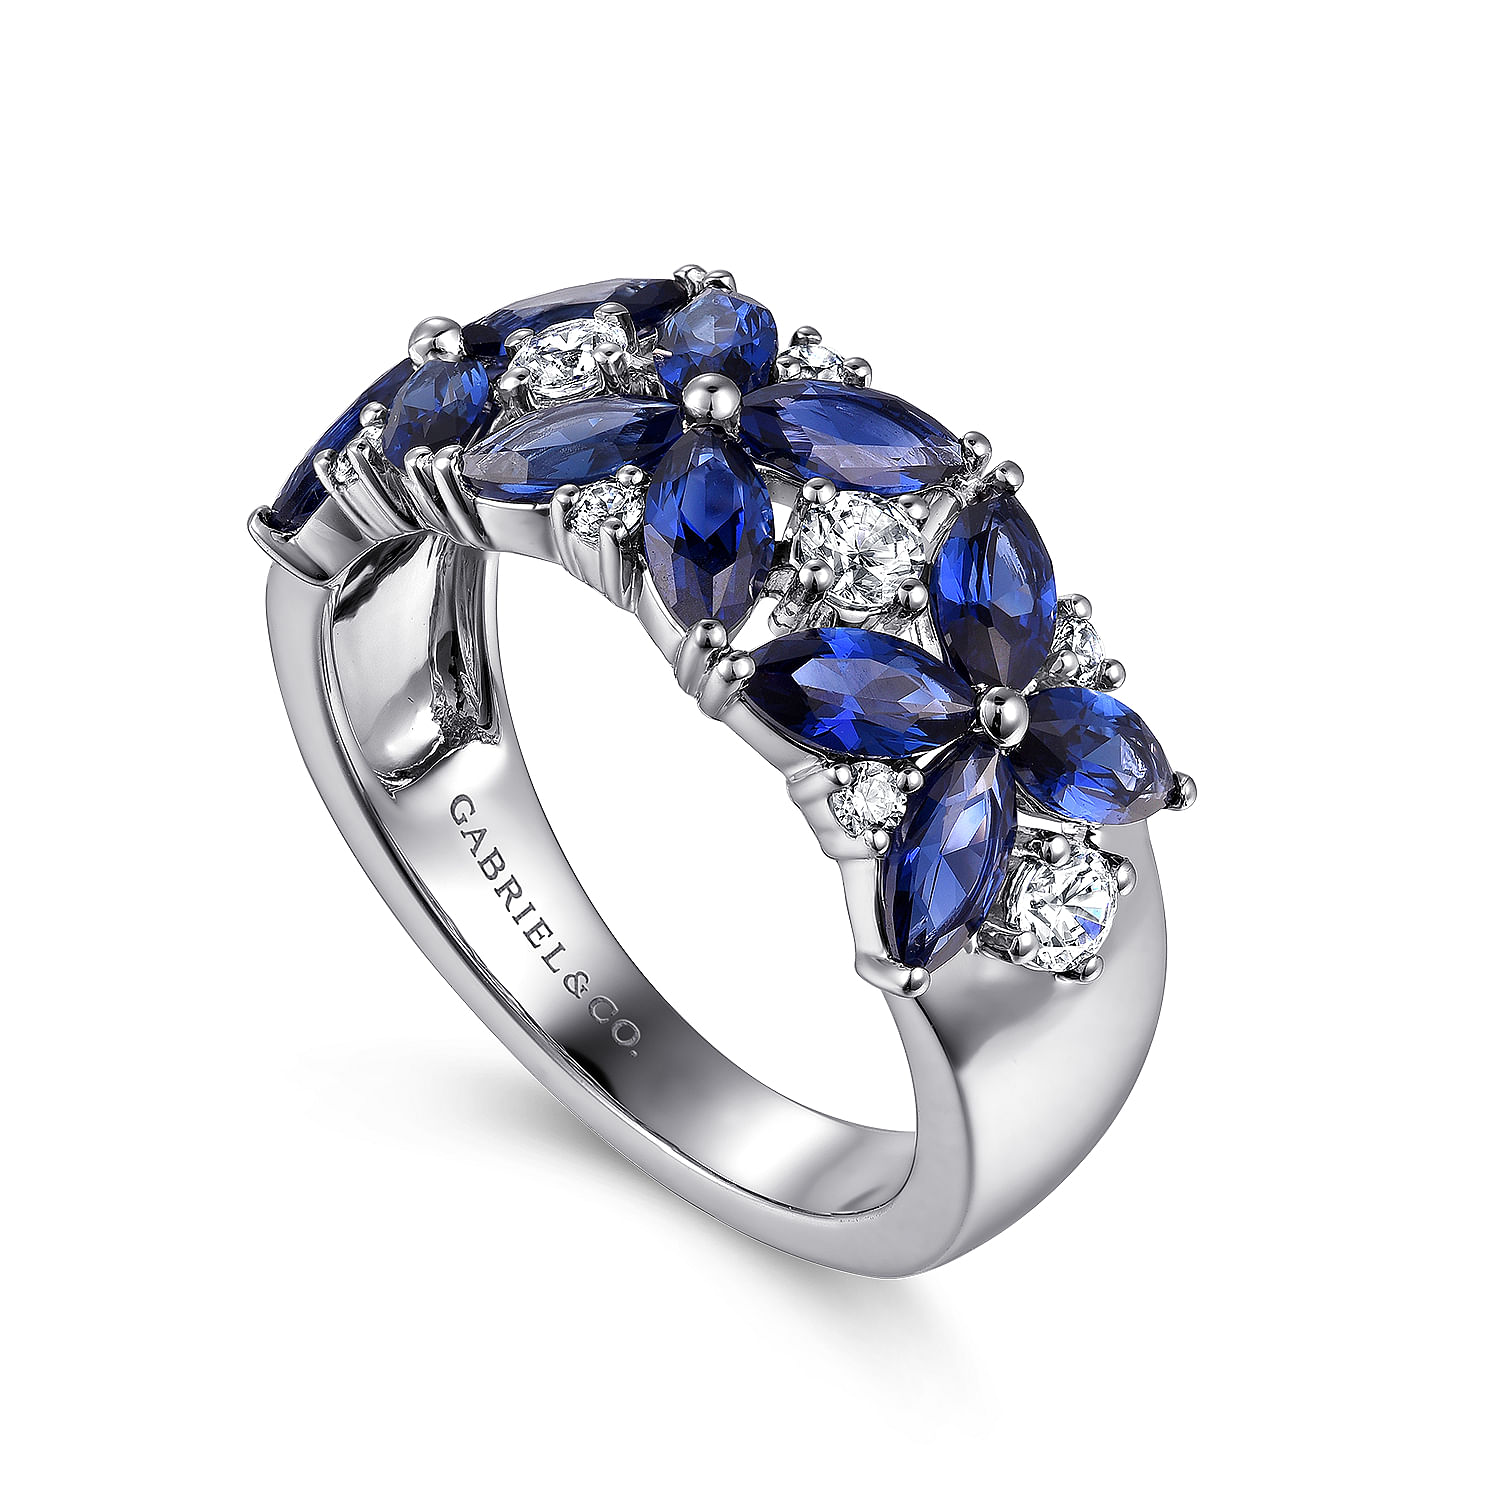 14K White Gold Diamond and Blue Sapphire Floral Wide Band Ring